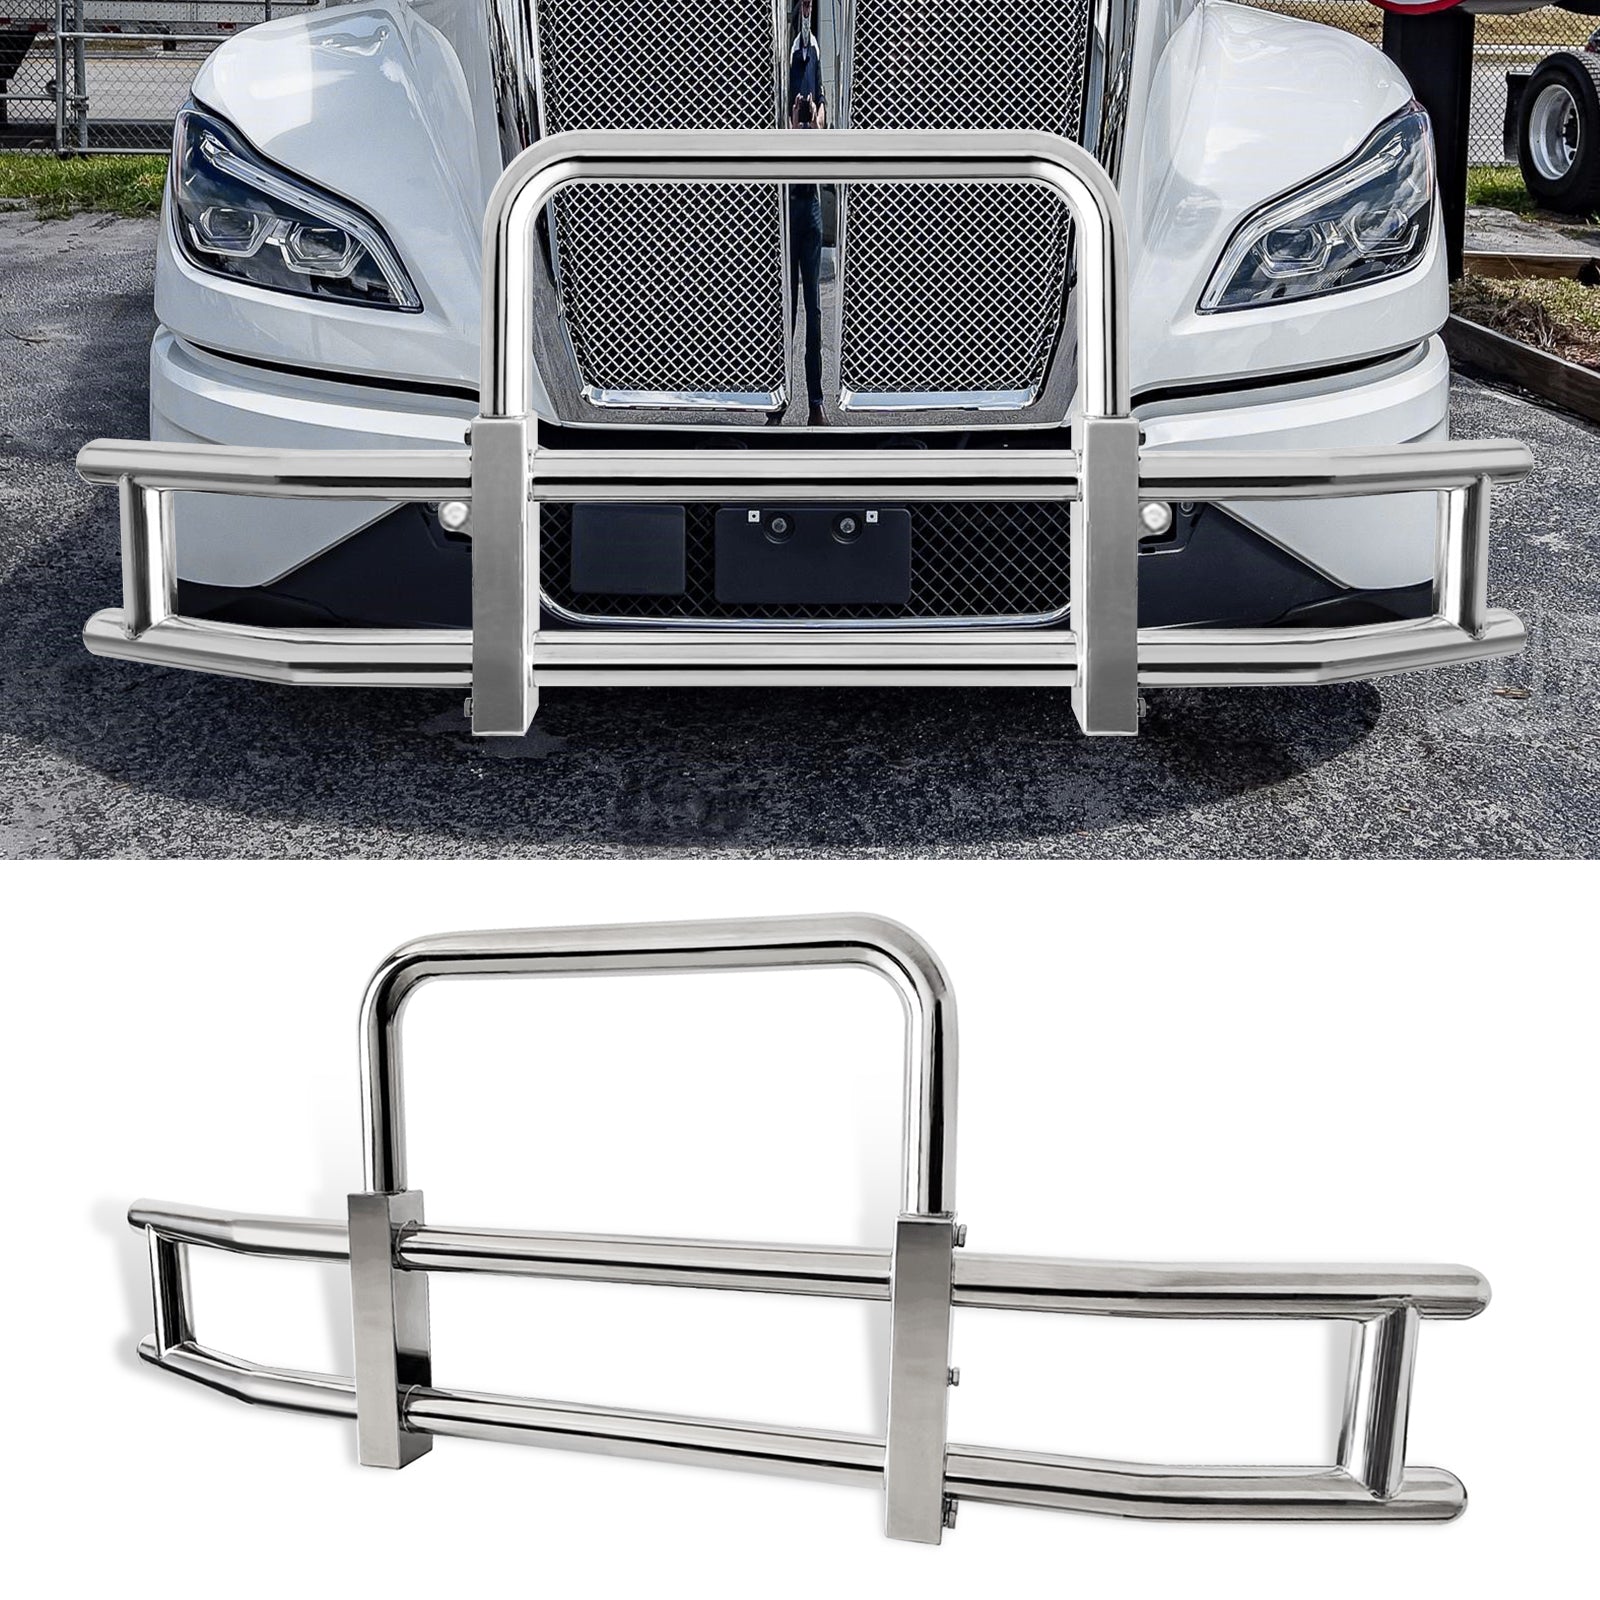 Deer Guard for Kenworth T680 2022 with brackets chrome-stainless steel